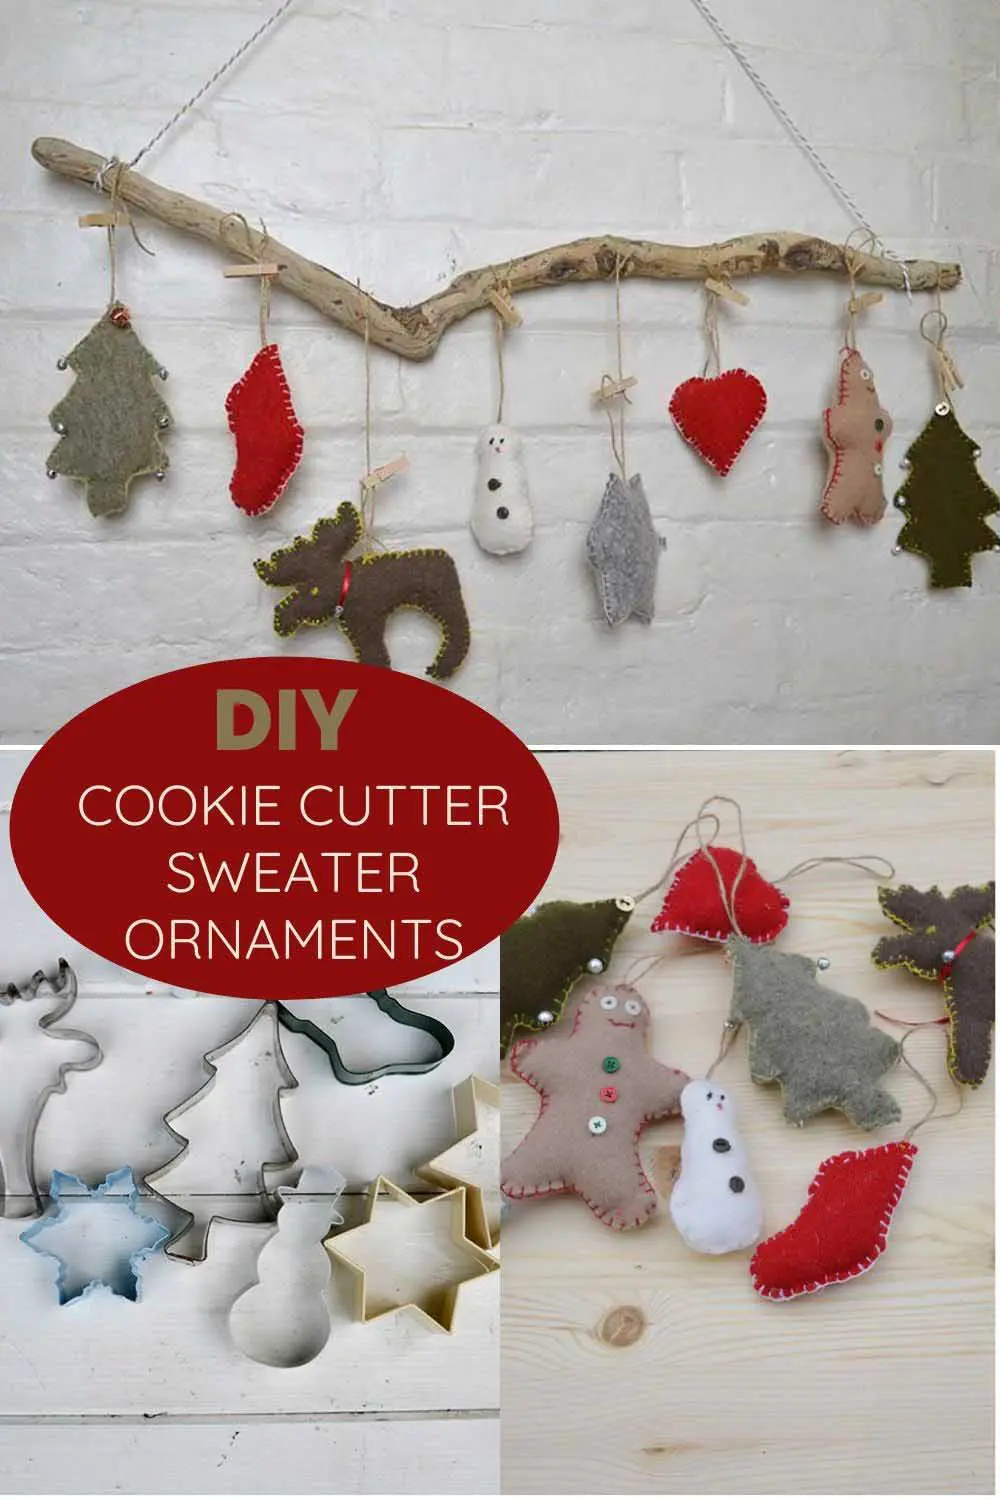 Easy Cookie Cutter Sweater Upcycled Christmas Ornaments - Pillar Box Blue